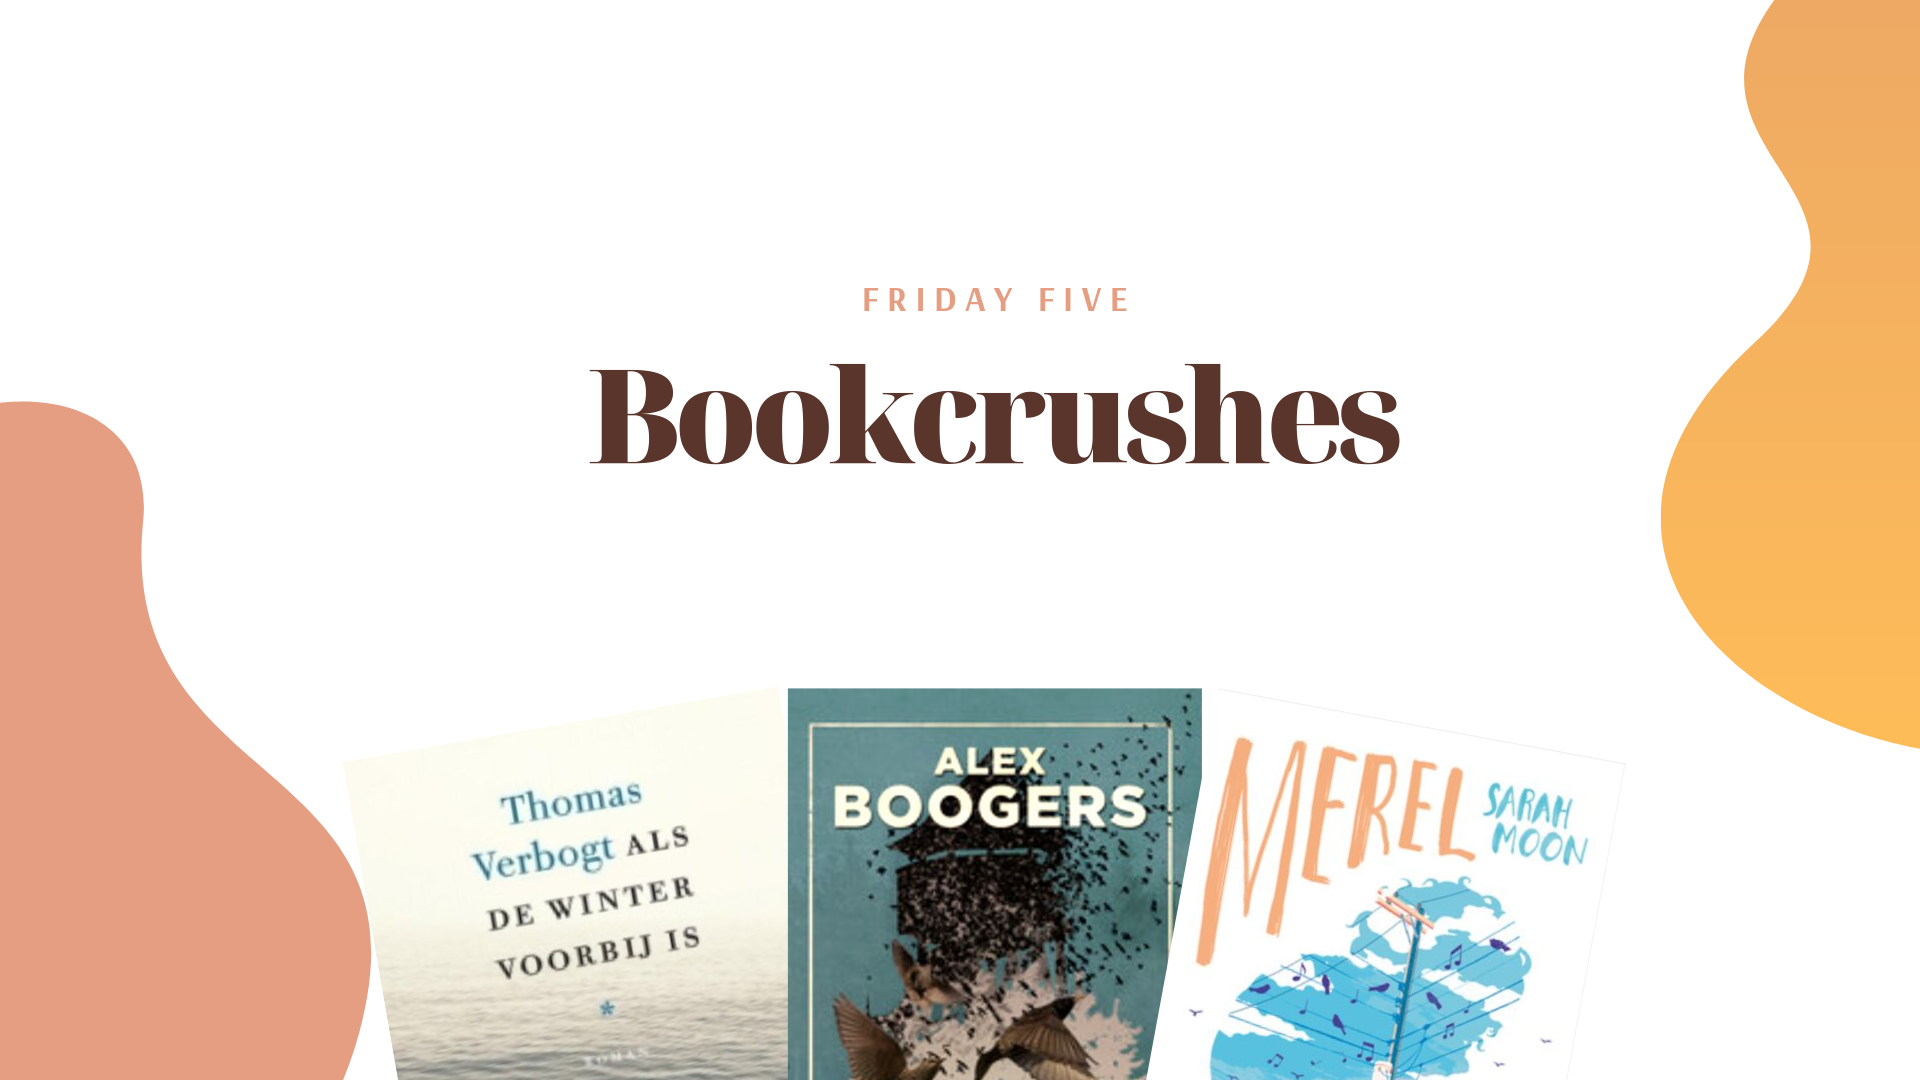 Friday Five: Bookcrushes